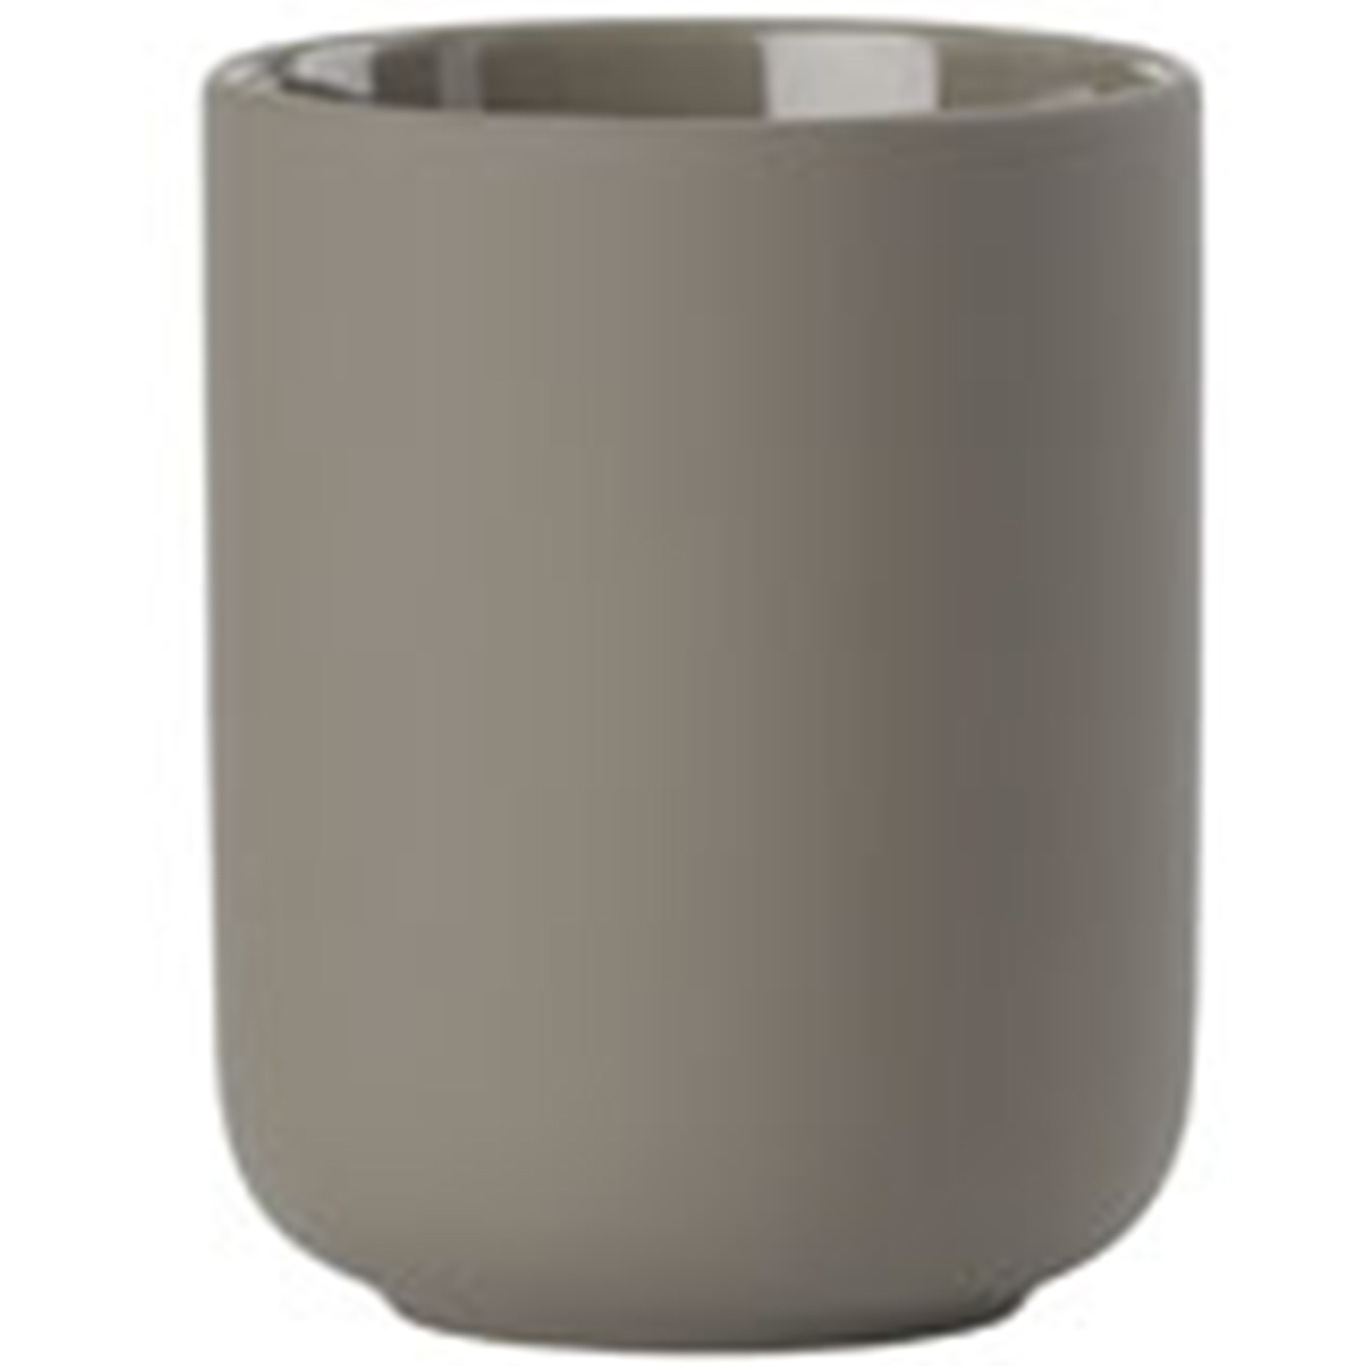 Ume Toothbrush Holder, Taupe